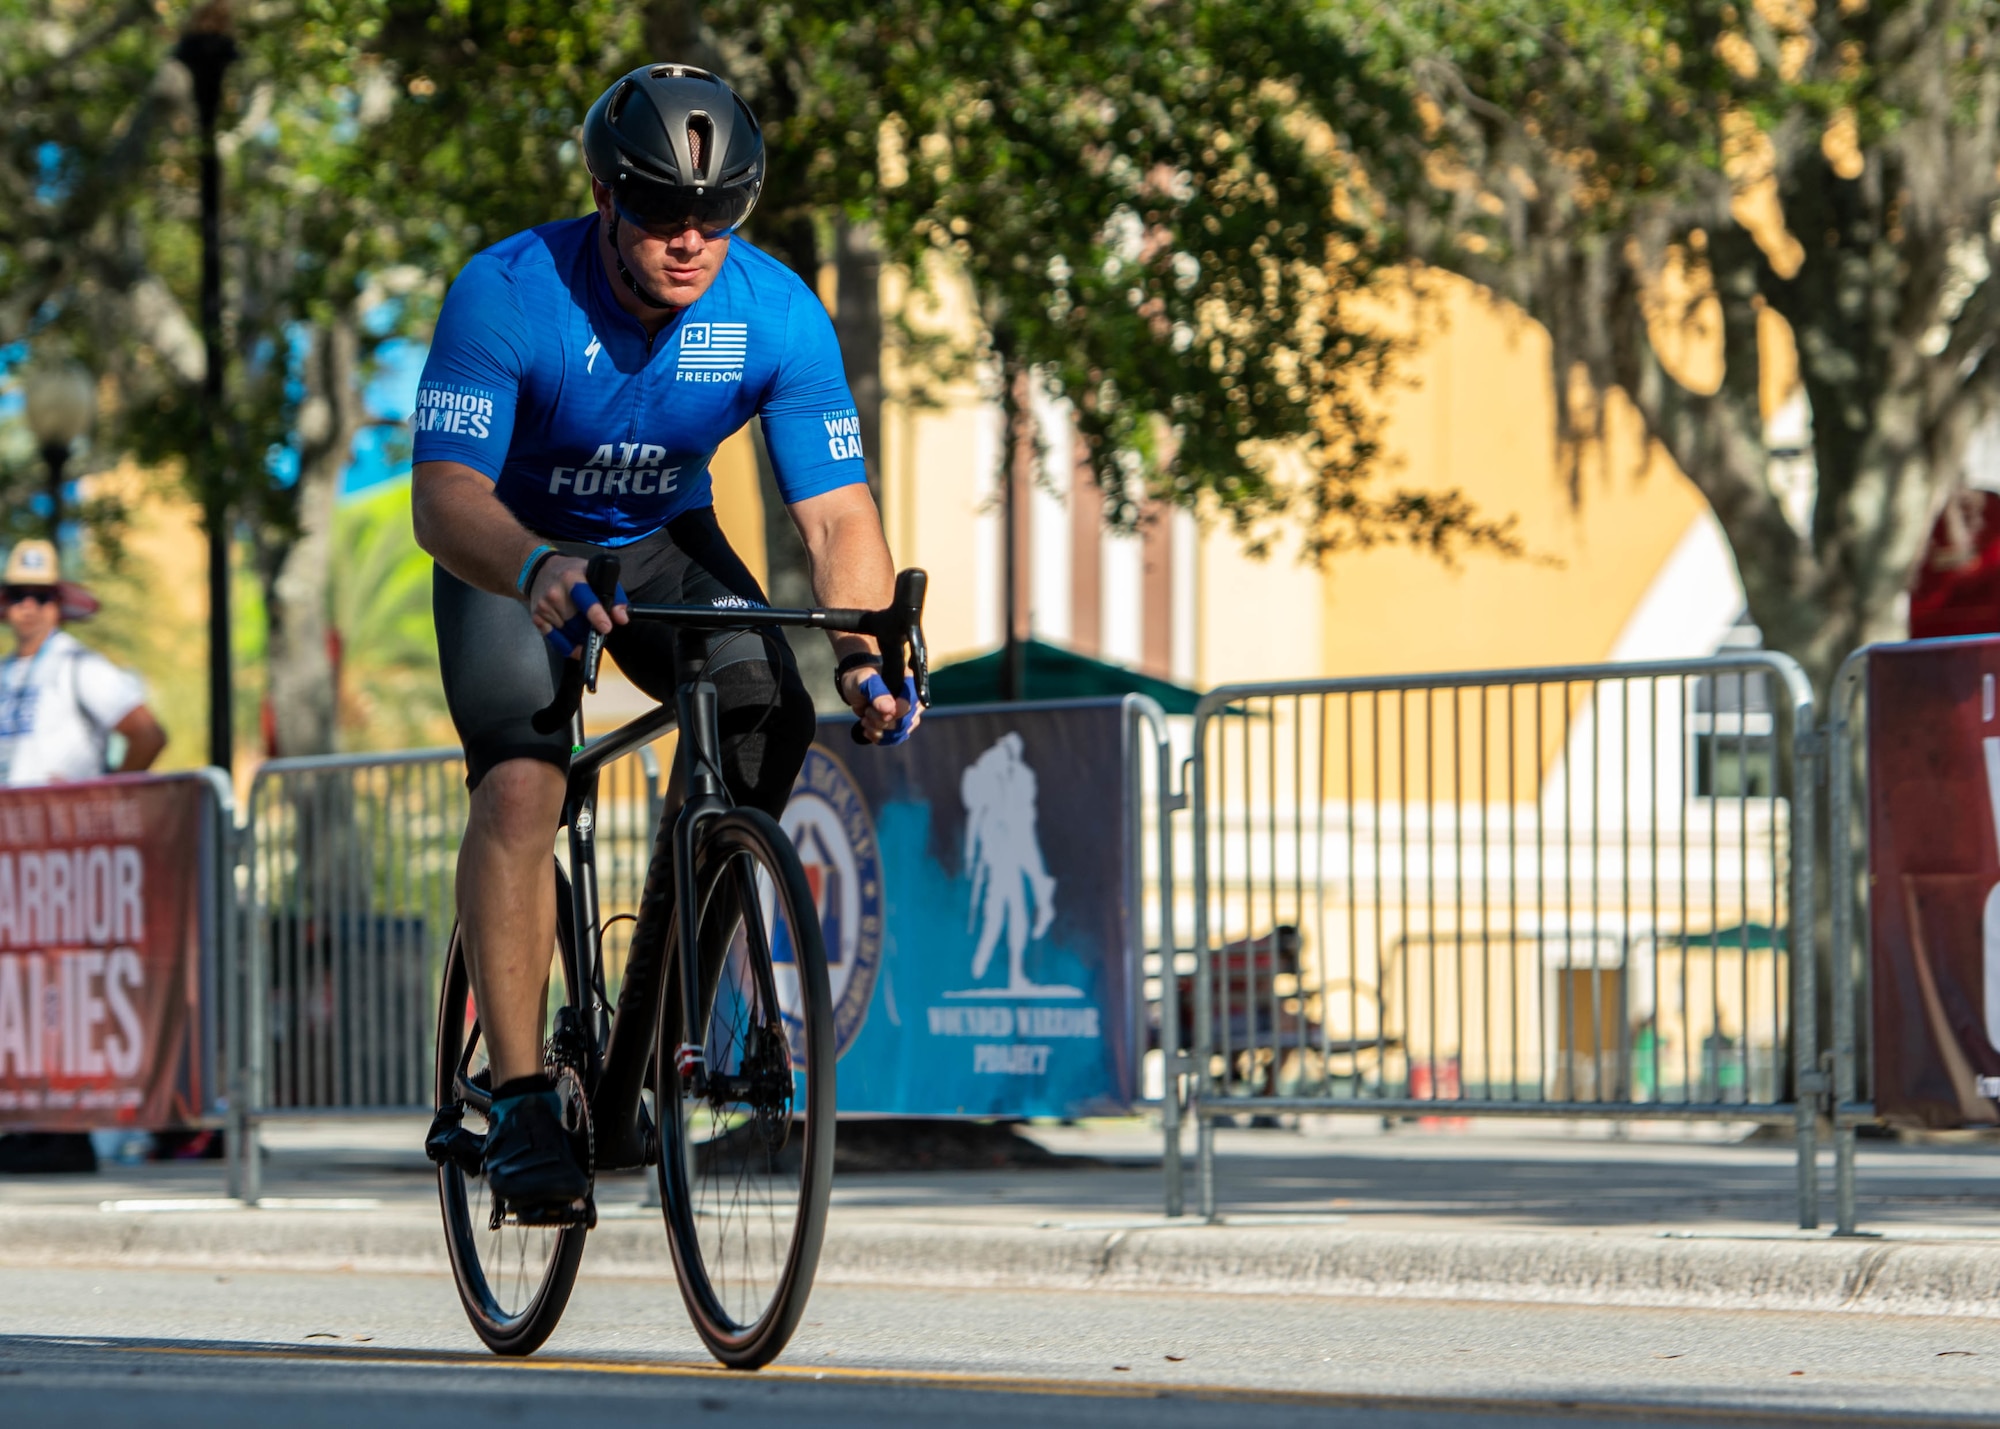 U.S. Air Force Senior MSgt. Benjamin Seekell, a Team Air Force Warrior Games athlete, begins his race during cycling time trials at the 2022 Department of Defense Warrior Games, August 22th, 2022, in Orlando, Florida.